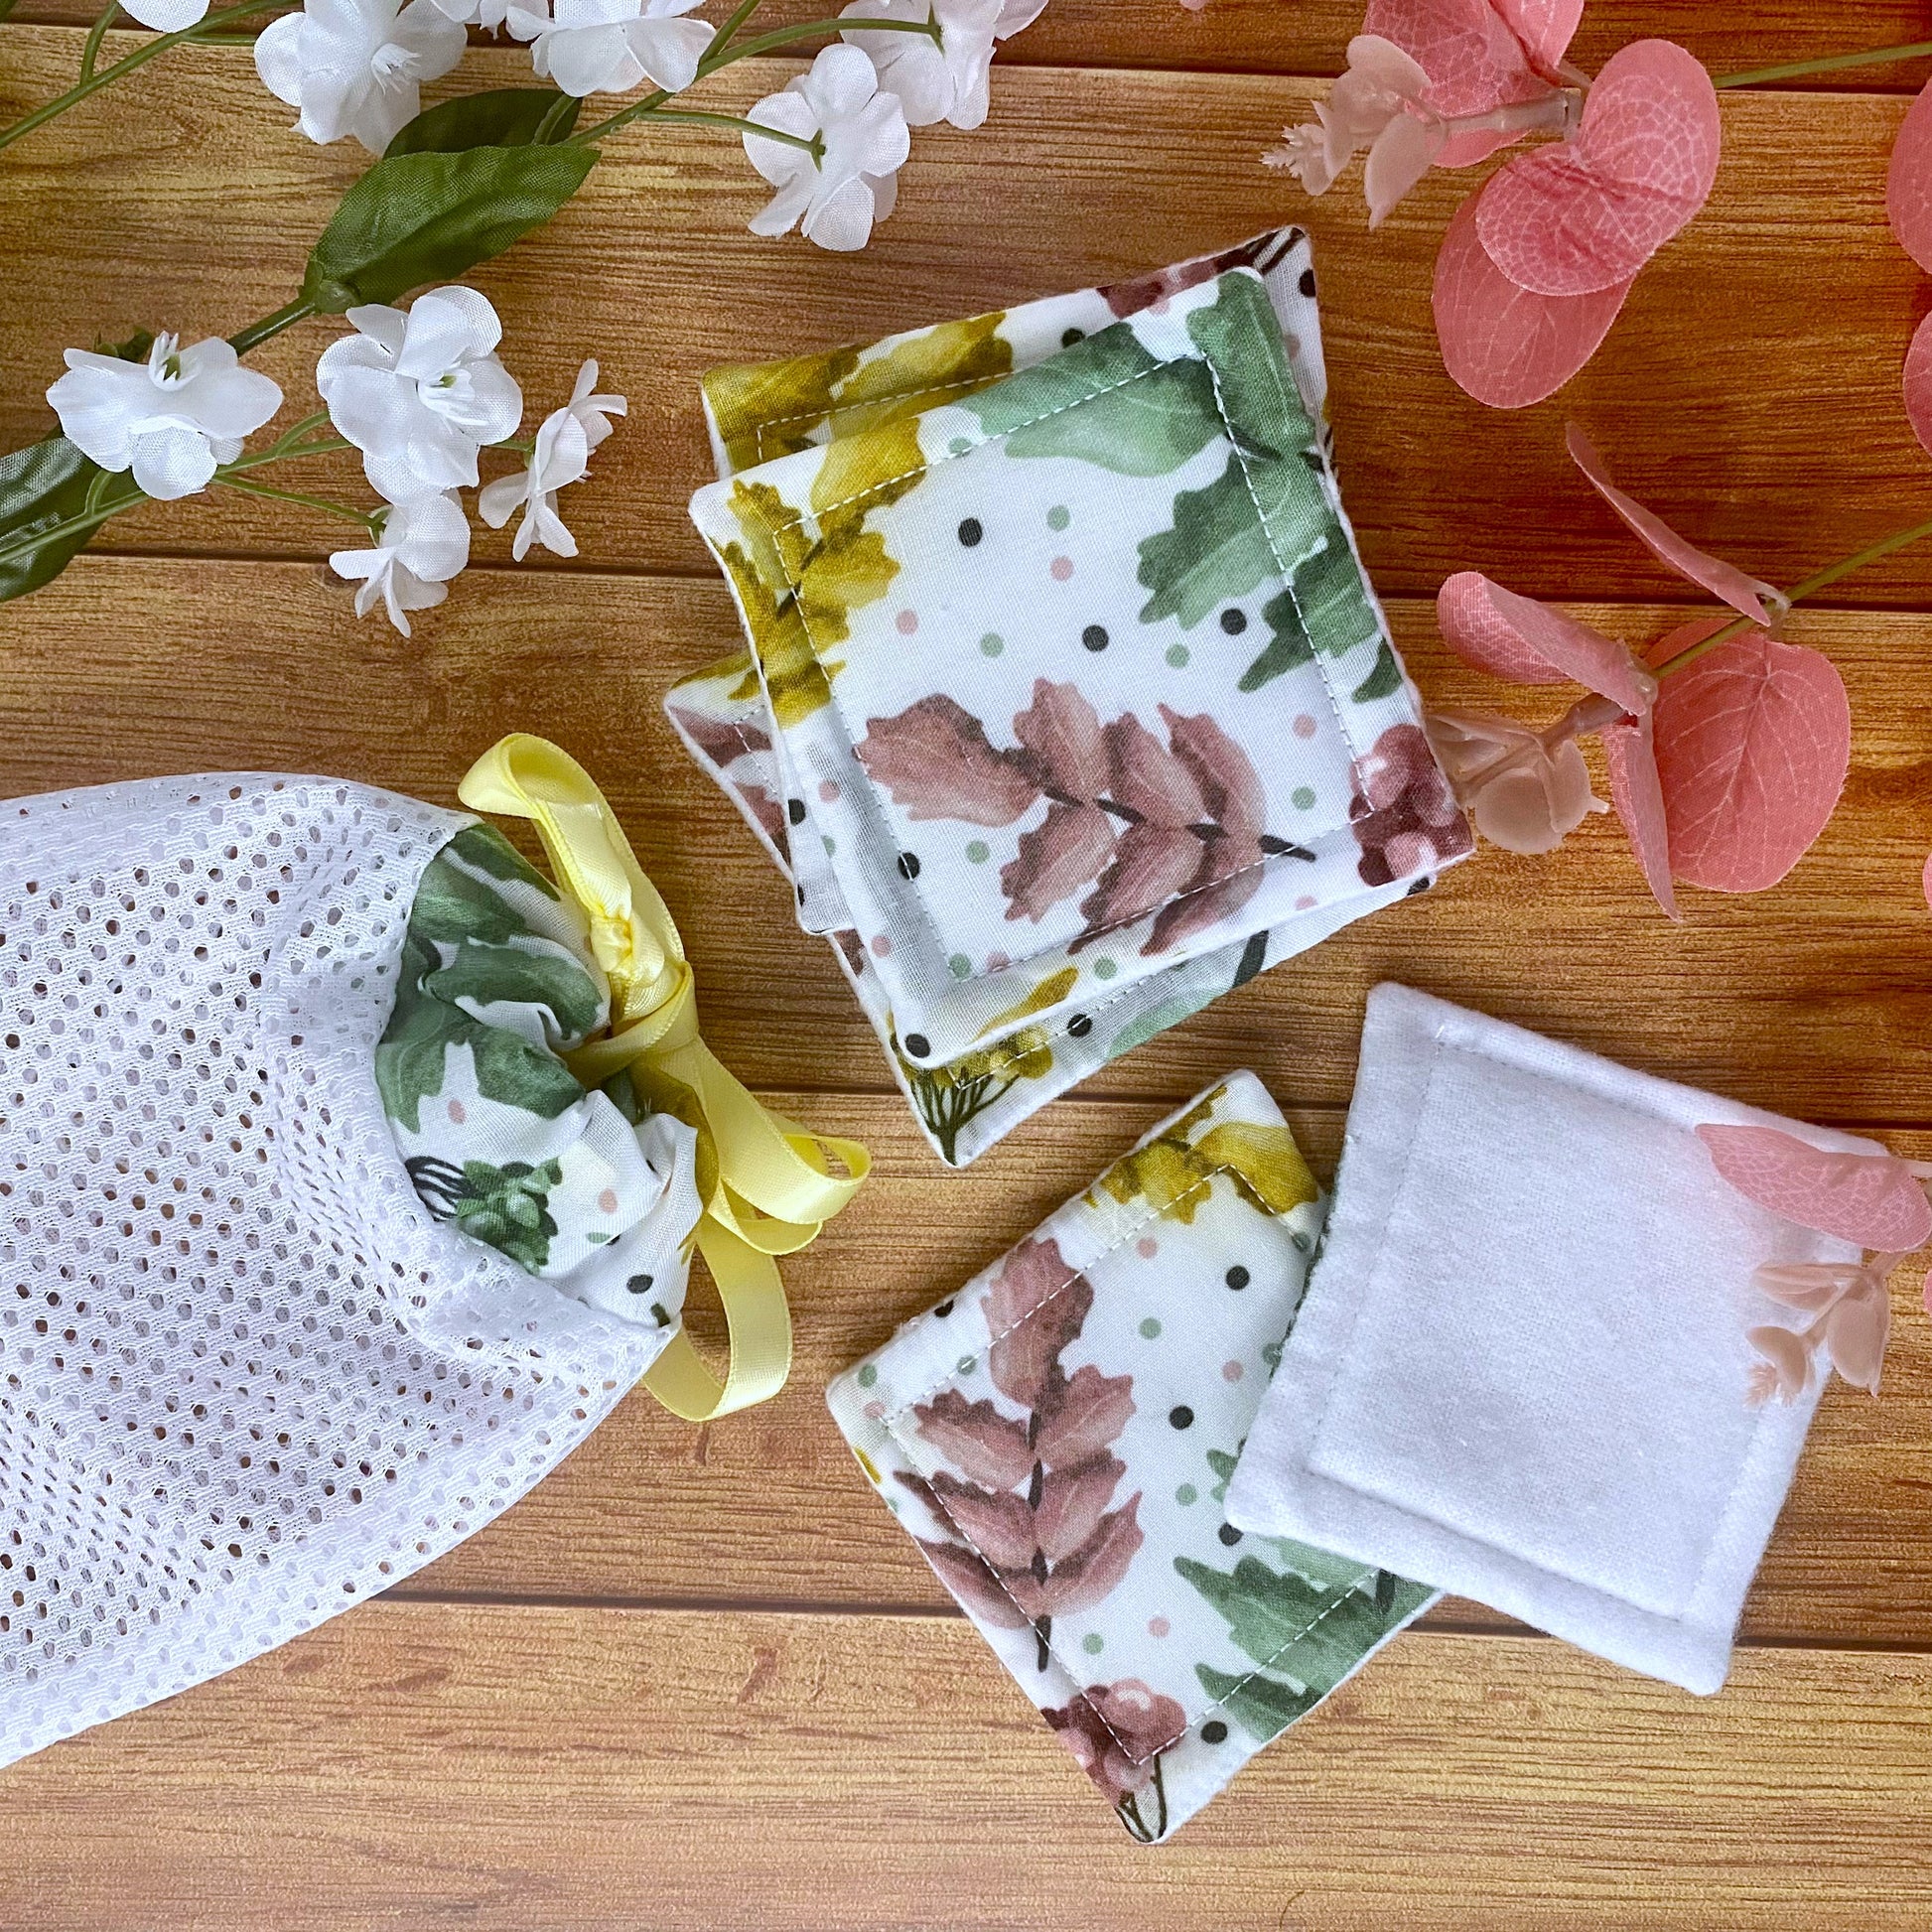 reusable skincare pads and washbag matching with pretty foliage pattern on them, on a wooden background with foliage around